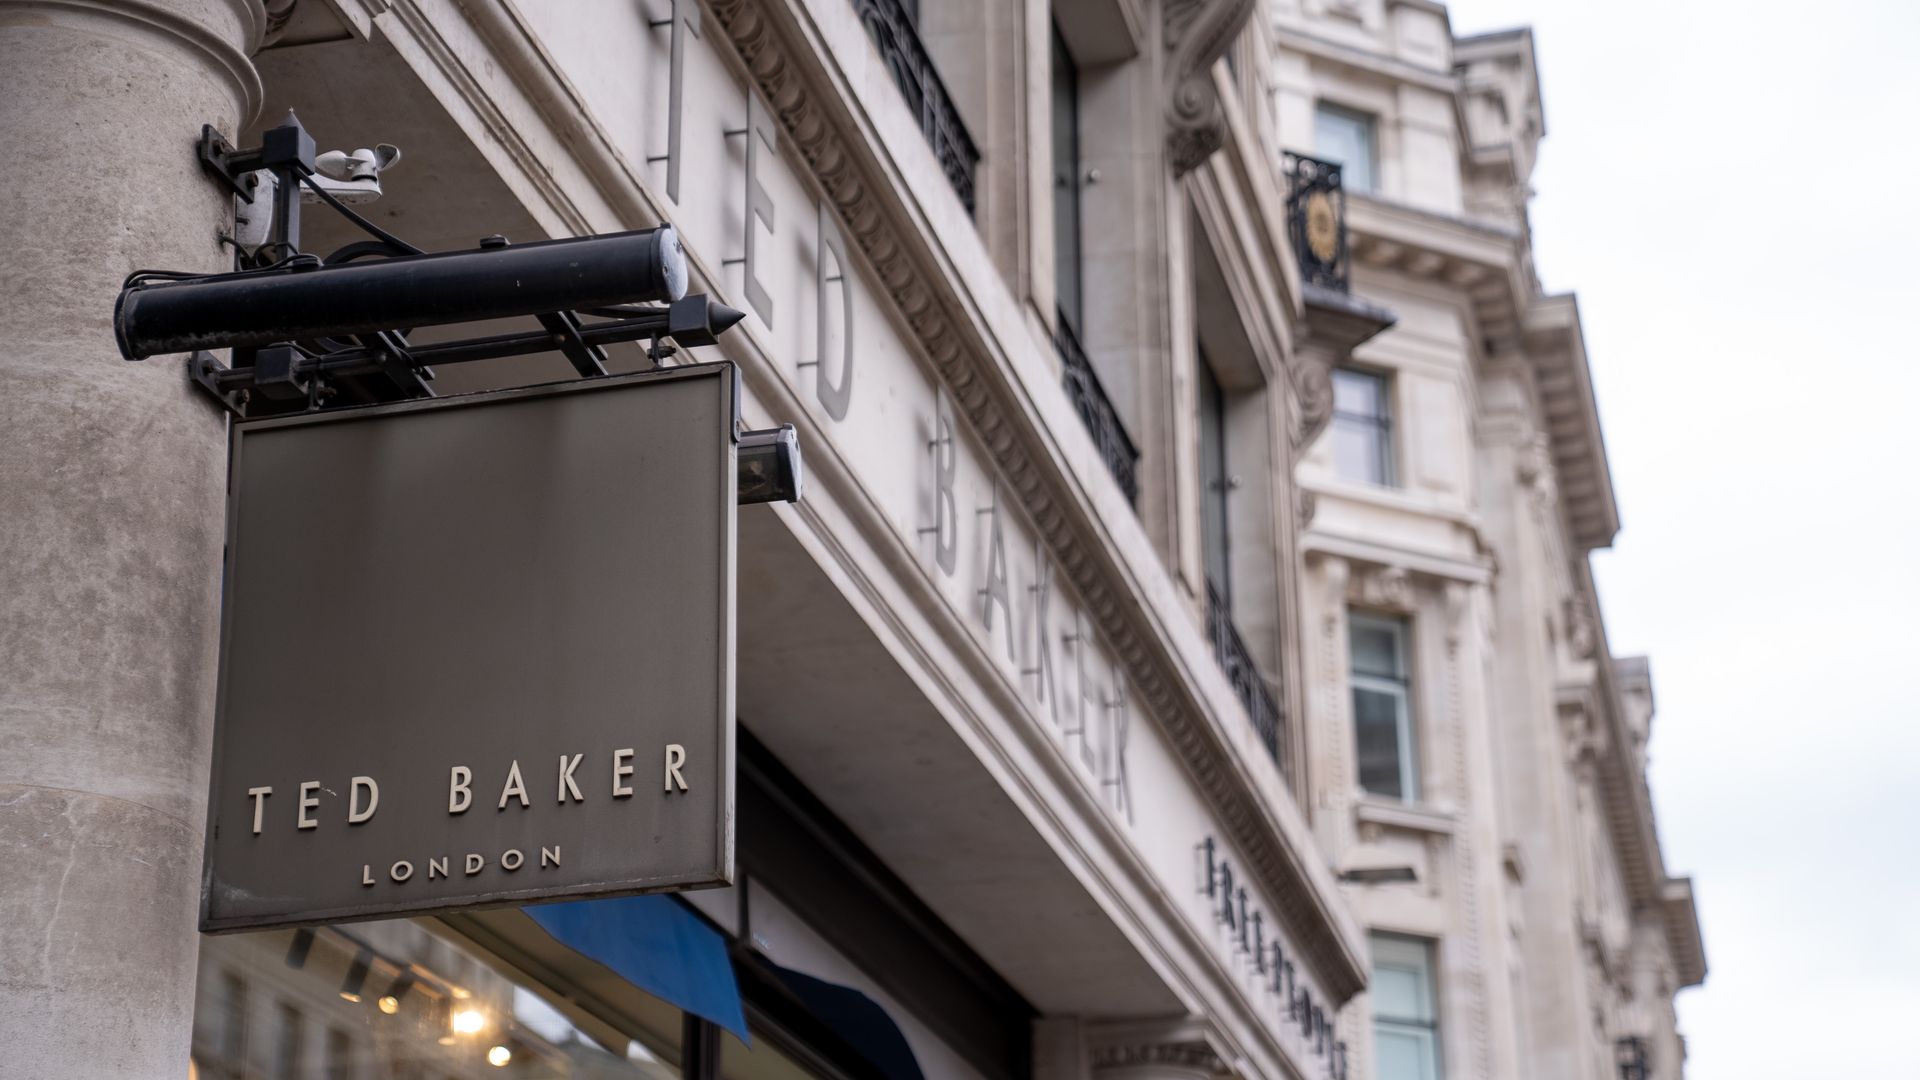 Ted Baker: What contributed to the beloved British brand's downfall